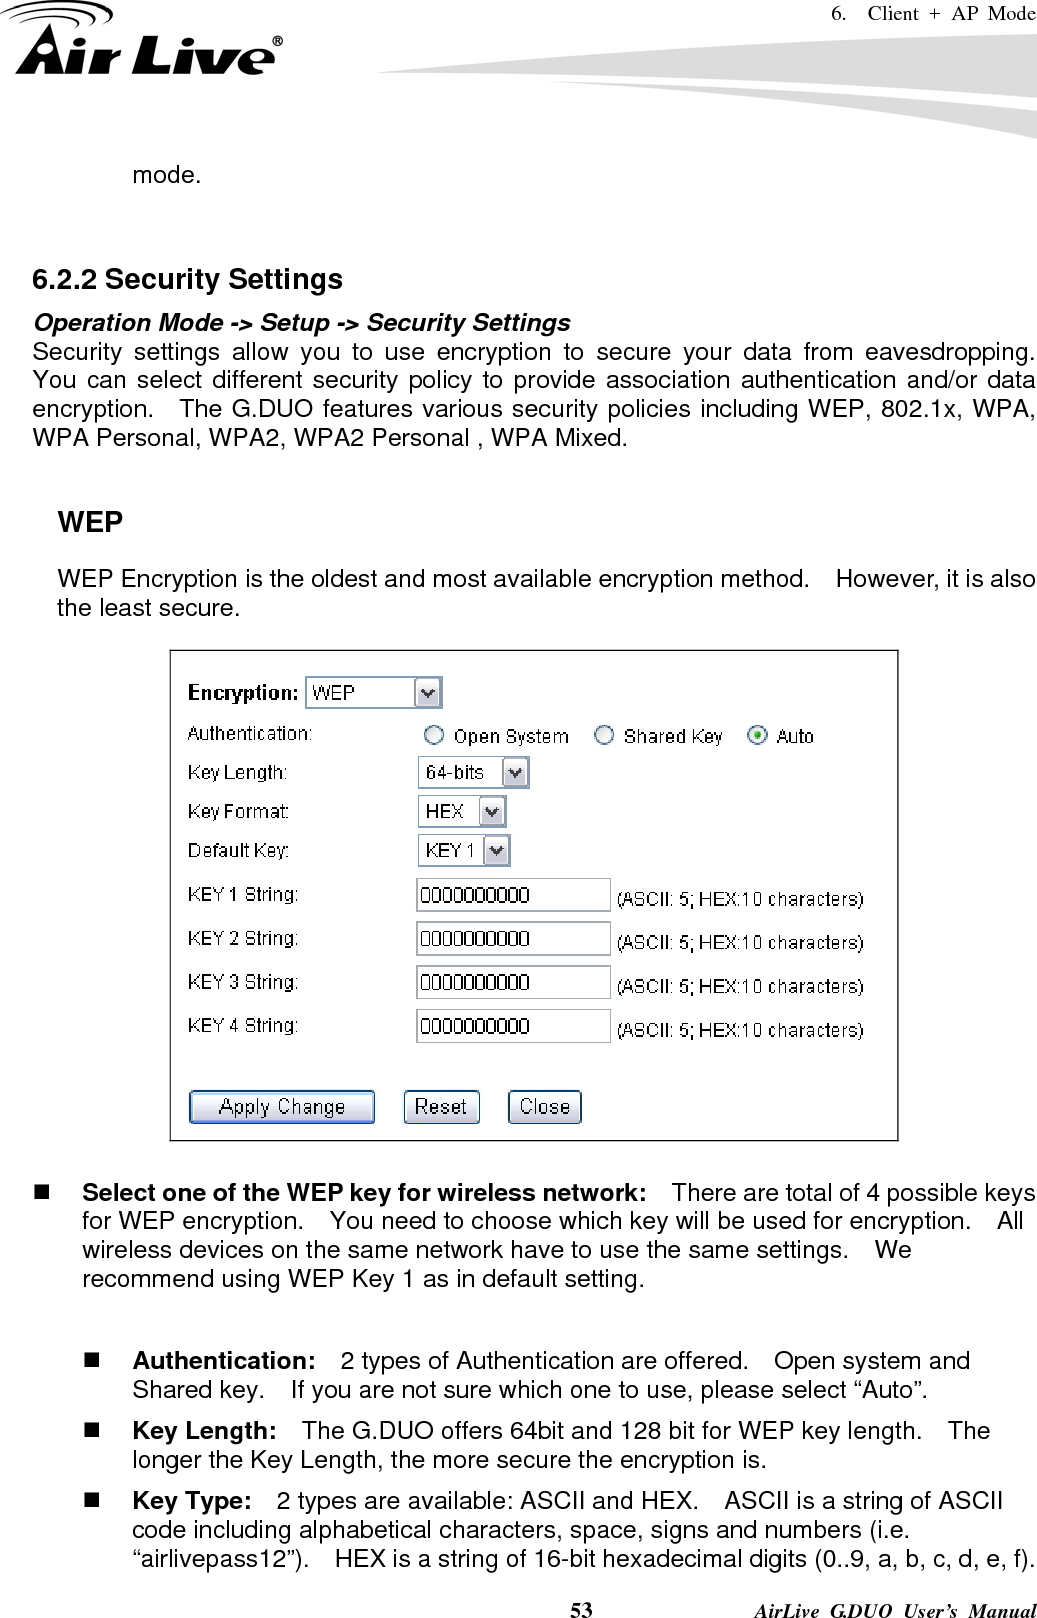 6.  Client + AP Mode    53              AirLive G.DUO User’s Manual mode.    6.2.2 Security Settings Operation Mode -&gt; Setup -&gt; Security Settings Security settings allow you to use encryption to secure your data from eavesdropping.  You can select different security policy to provide association authentication and/or data encryption.    The G.DUO features various security policies including WEP, 802.1x, WPA, WPA Personal, WPA2, WPA2 Personal , WPA Mixed.      WEP WEP Encryption is the oldest and most available encryption method.    However, it is also the least secure.       Select one of the WEP key for wireless network:    There are total of 4 possible keys for WEP encryption.    You need to choose which key will be used for encryption.  All wireless devices on the same network have to use the same settings.    We recommend using WEP Key 1 as in default setting.   Authentication:  2 types of Authentication are offered.    Open system and Shared key.    If you are not sure which one to use, please select “Auto”.  Key Length:    The G.DUO offers 64bit and 128 bit for WEP key length.    The longer the Key Length, the more secure the encryption is.  Key Type:    2 types are available: ASCII and HEX.    ASCII is a string of ASCII code including alphabetical characters, space, signs and numbers (i.e. “airlivepass12”).    HEX is a string of 16-bit hexadecimal digits (0..9, a, b, c, d, e, f).   